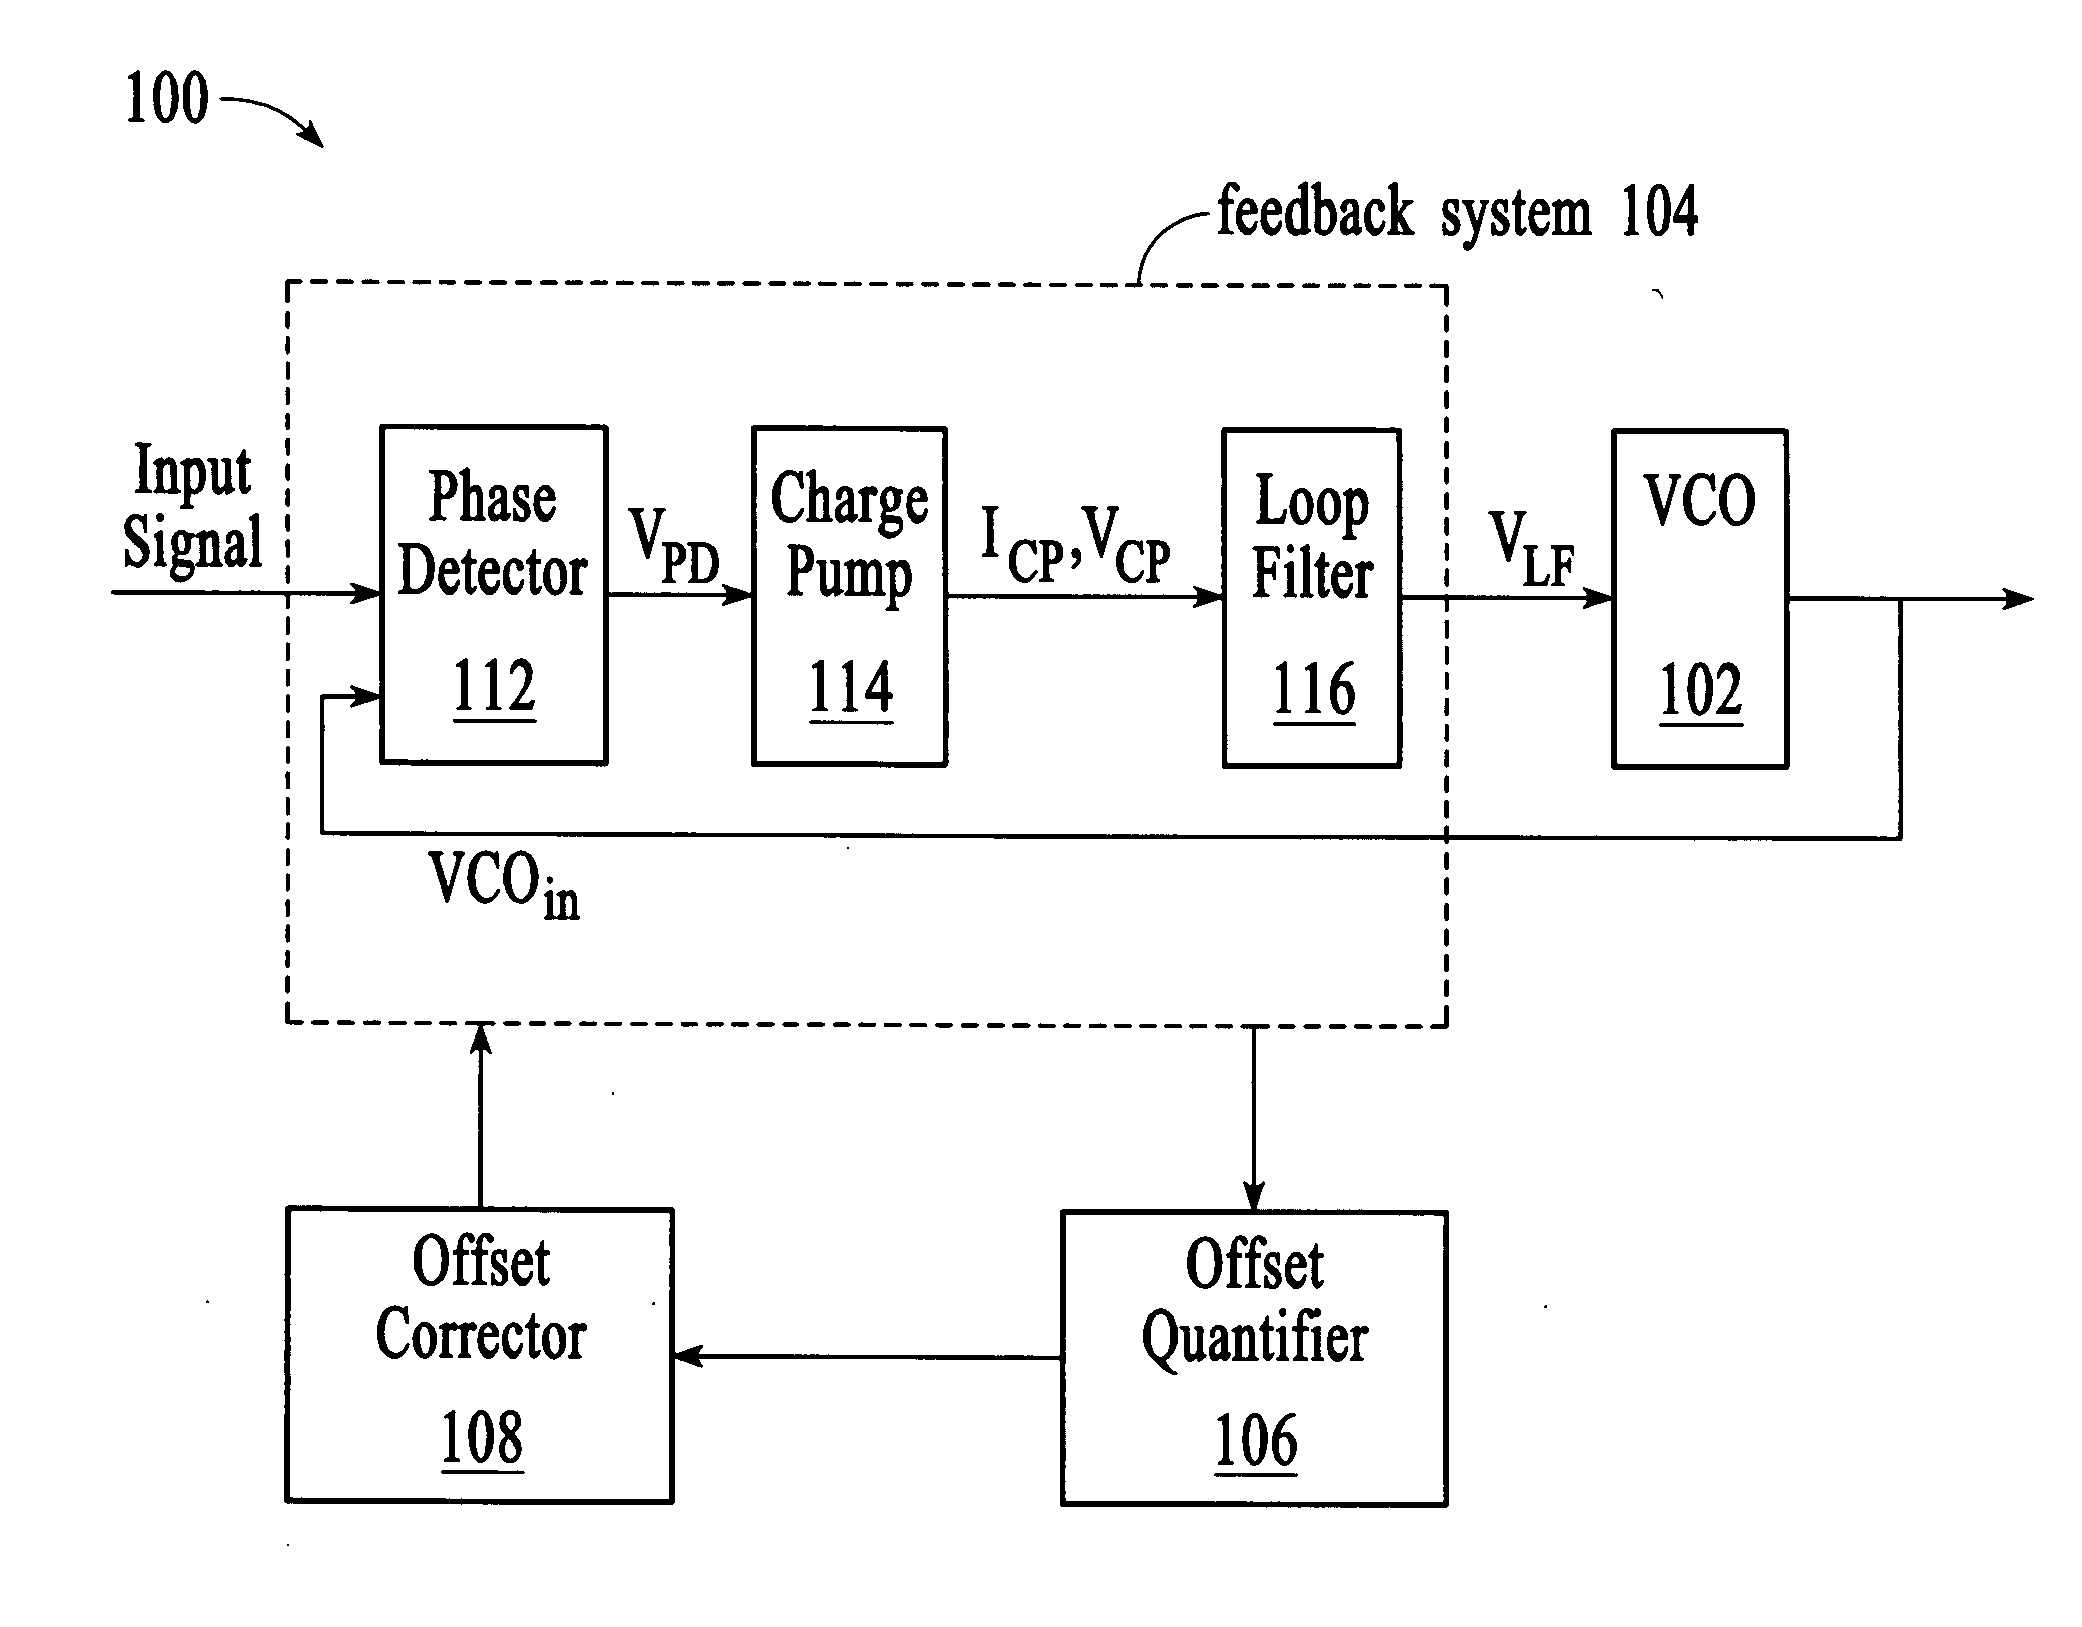 Offset correction in a feedback system for a voltage controlled oscillator